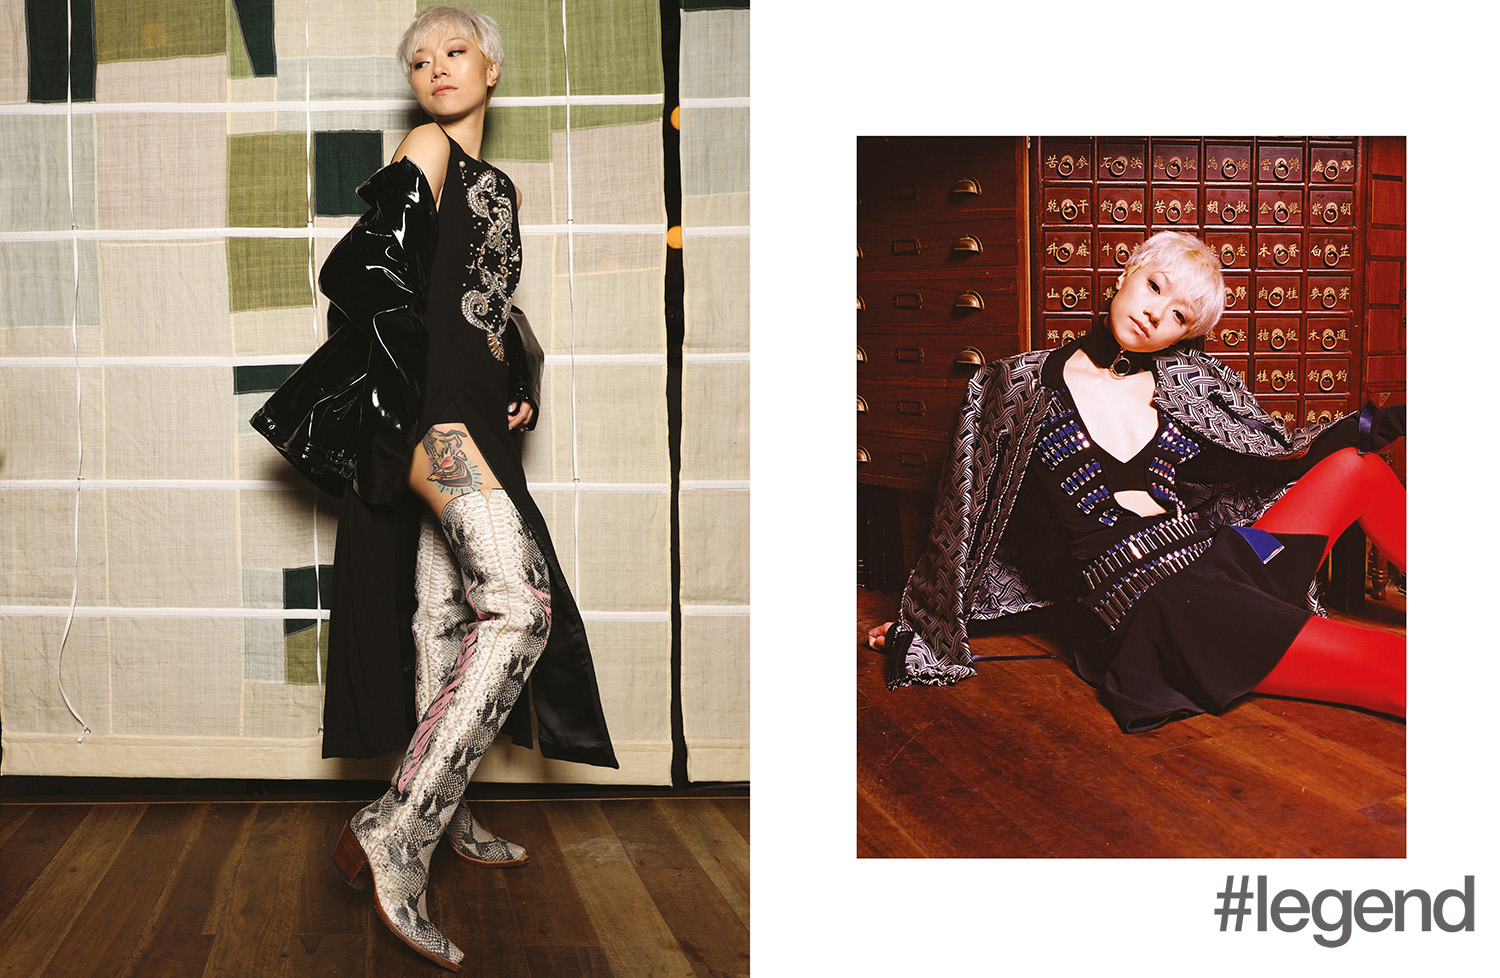 Left: Dress by Fausto Puglisi at Joyce, jacket from Monki and boots by Rocketbuster x House of Holland; Right: Jacket from Victoria Victoria Beckham at Joyce,  dress by David Koma at Joyce and choker and stockings by Monki 